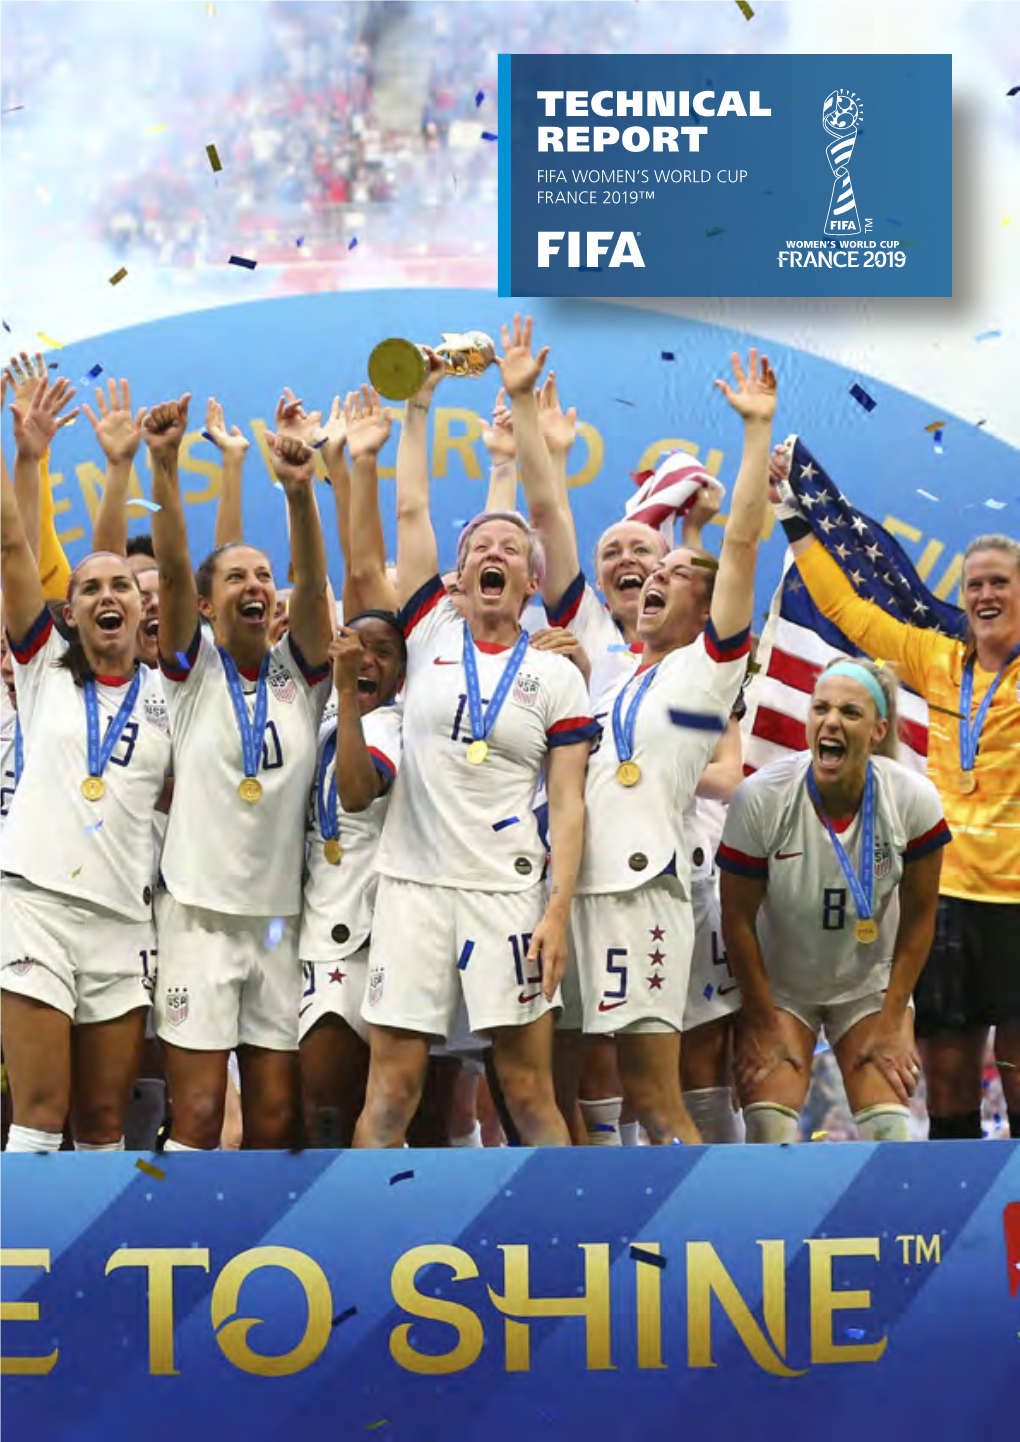 TECHNICAL REPORT FIFA WOMEN’S WORLD CUP FRANCE 2019™ 2 FIFA Women’S World Cup France 2019™